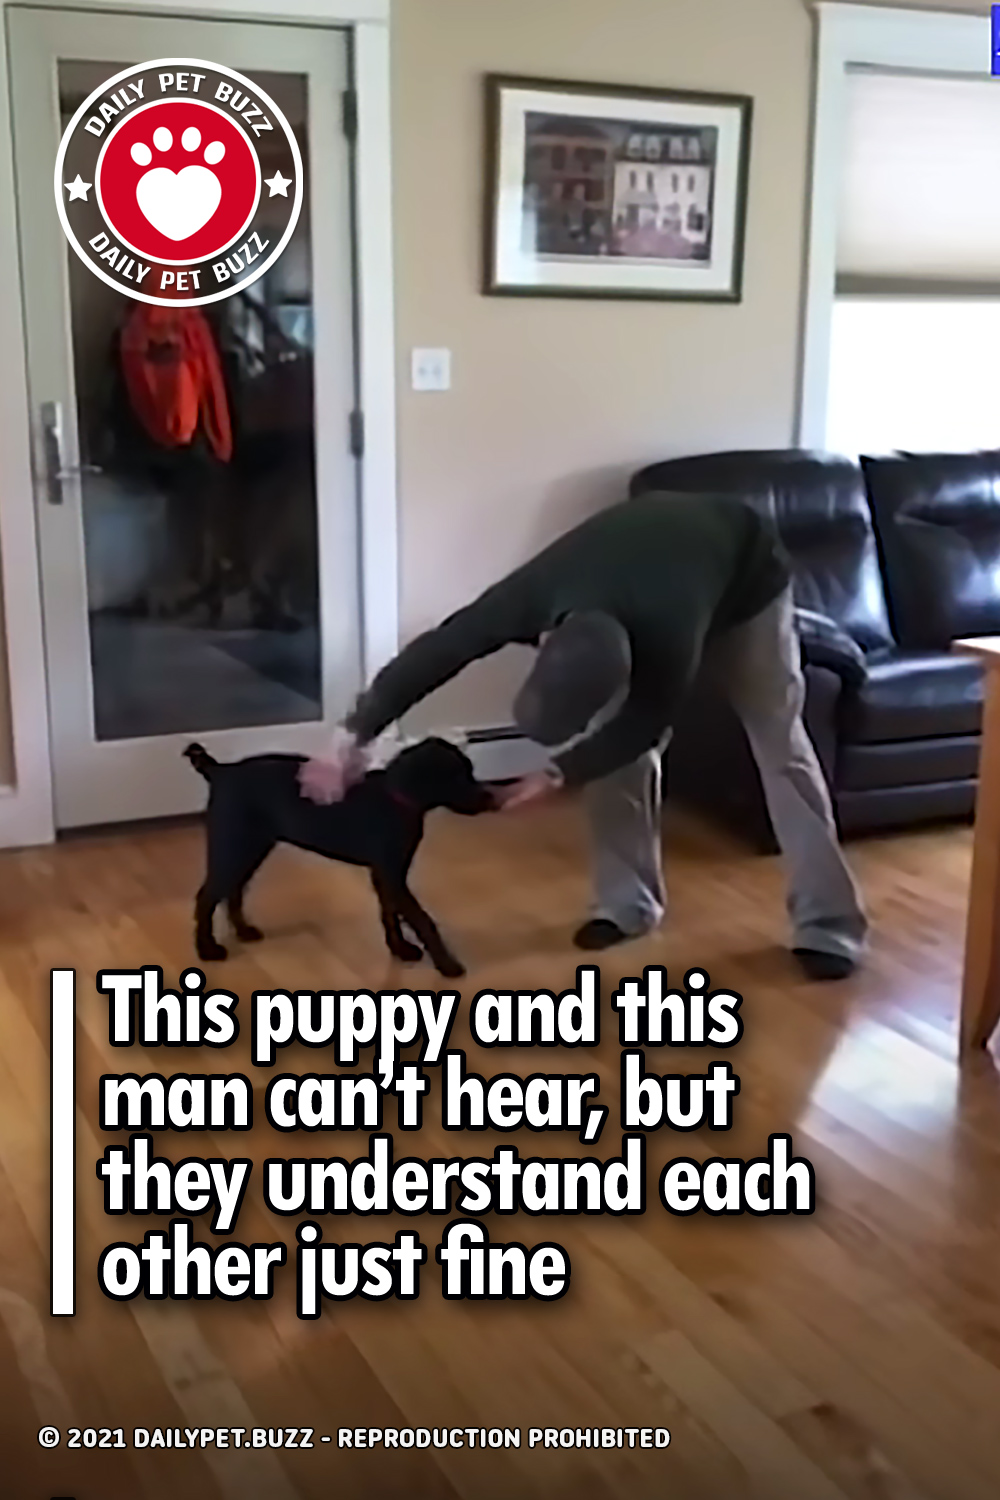 This puppy and this man can’t hear, but they understand each other just fine